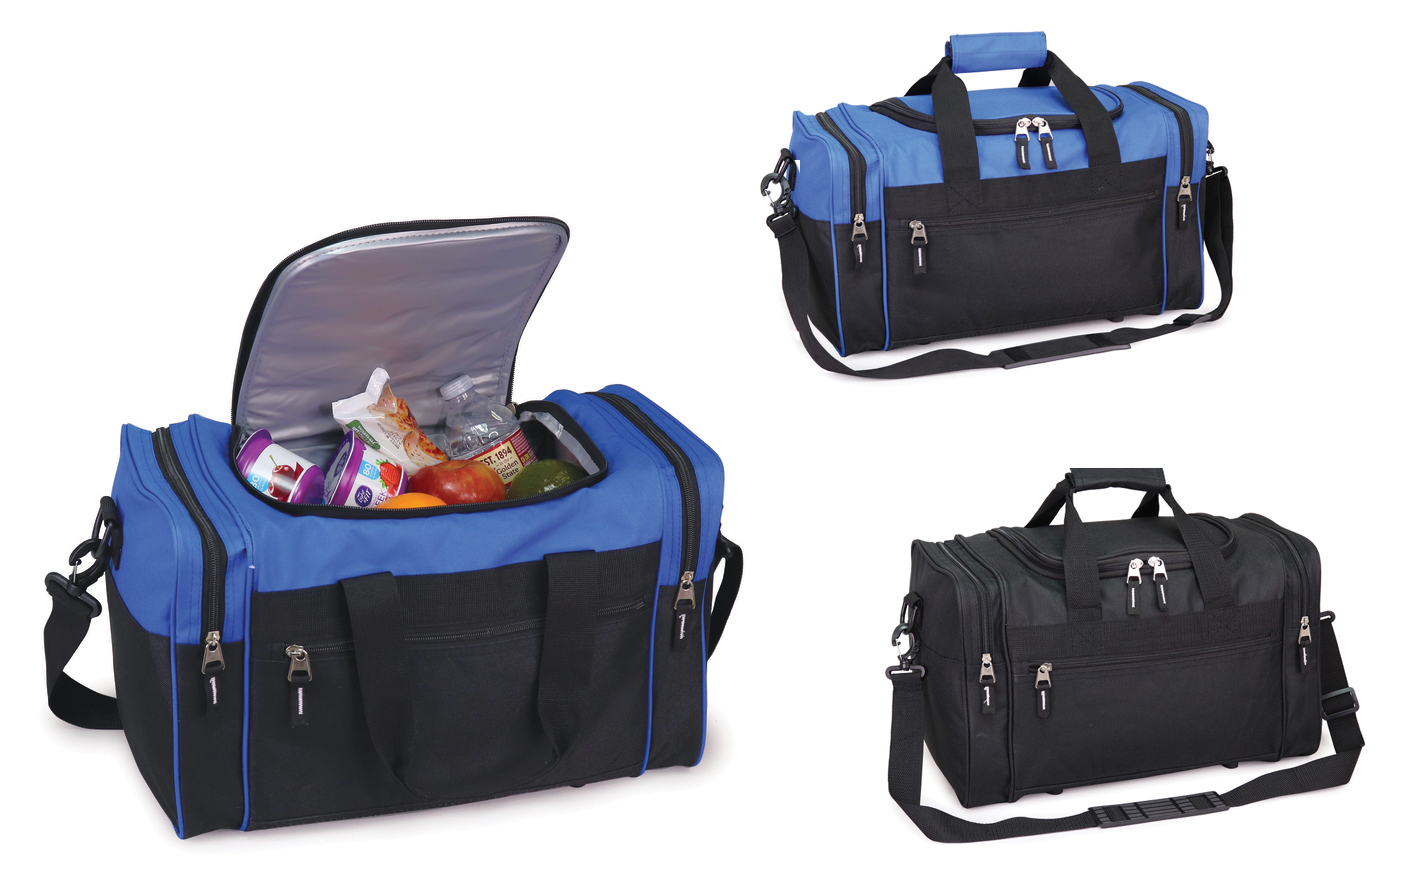 Insulated 30-Can Zip-Up Duffle Cooler Bags - Choose Your Color(s)